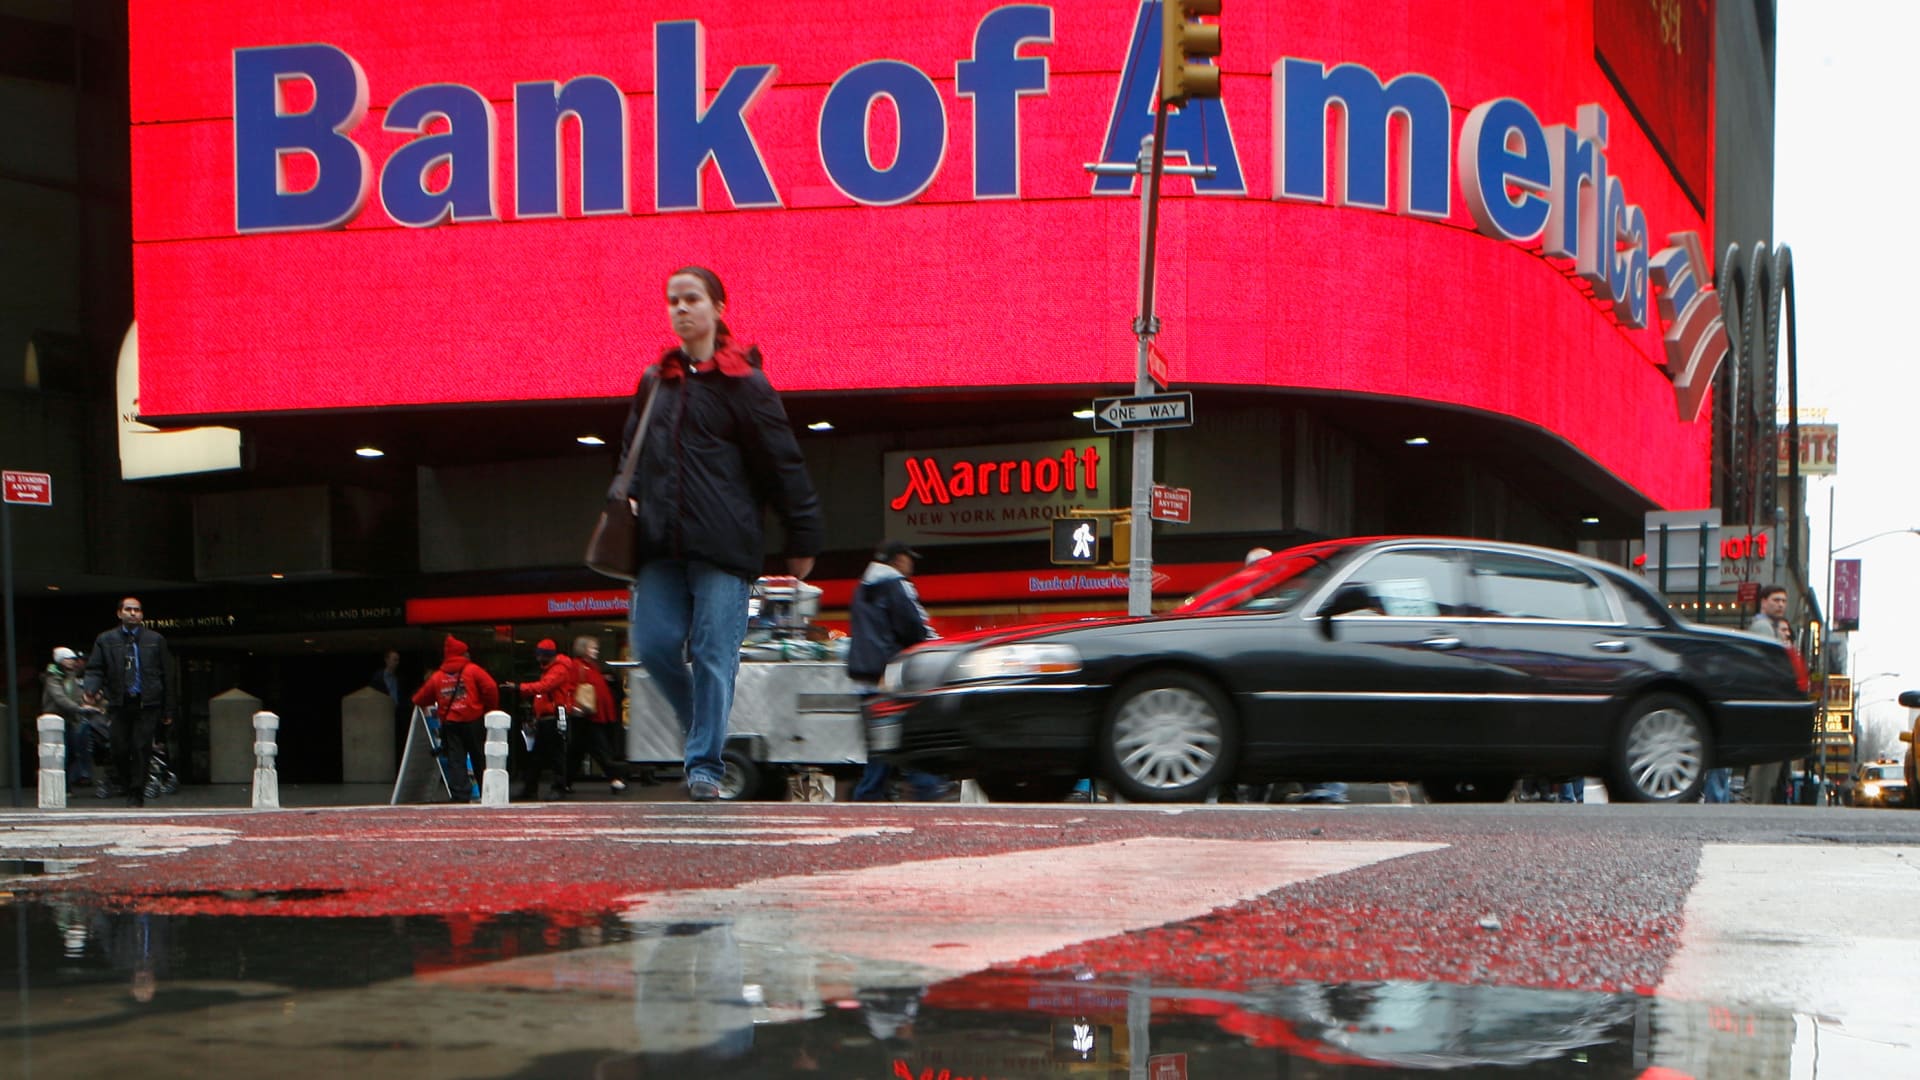 Bank of America fined $225 million over unemployment benefits program